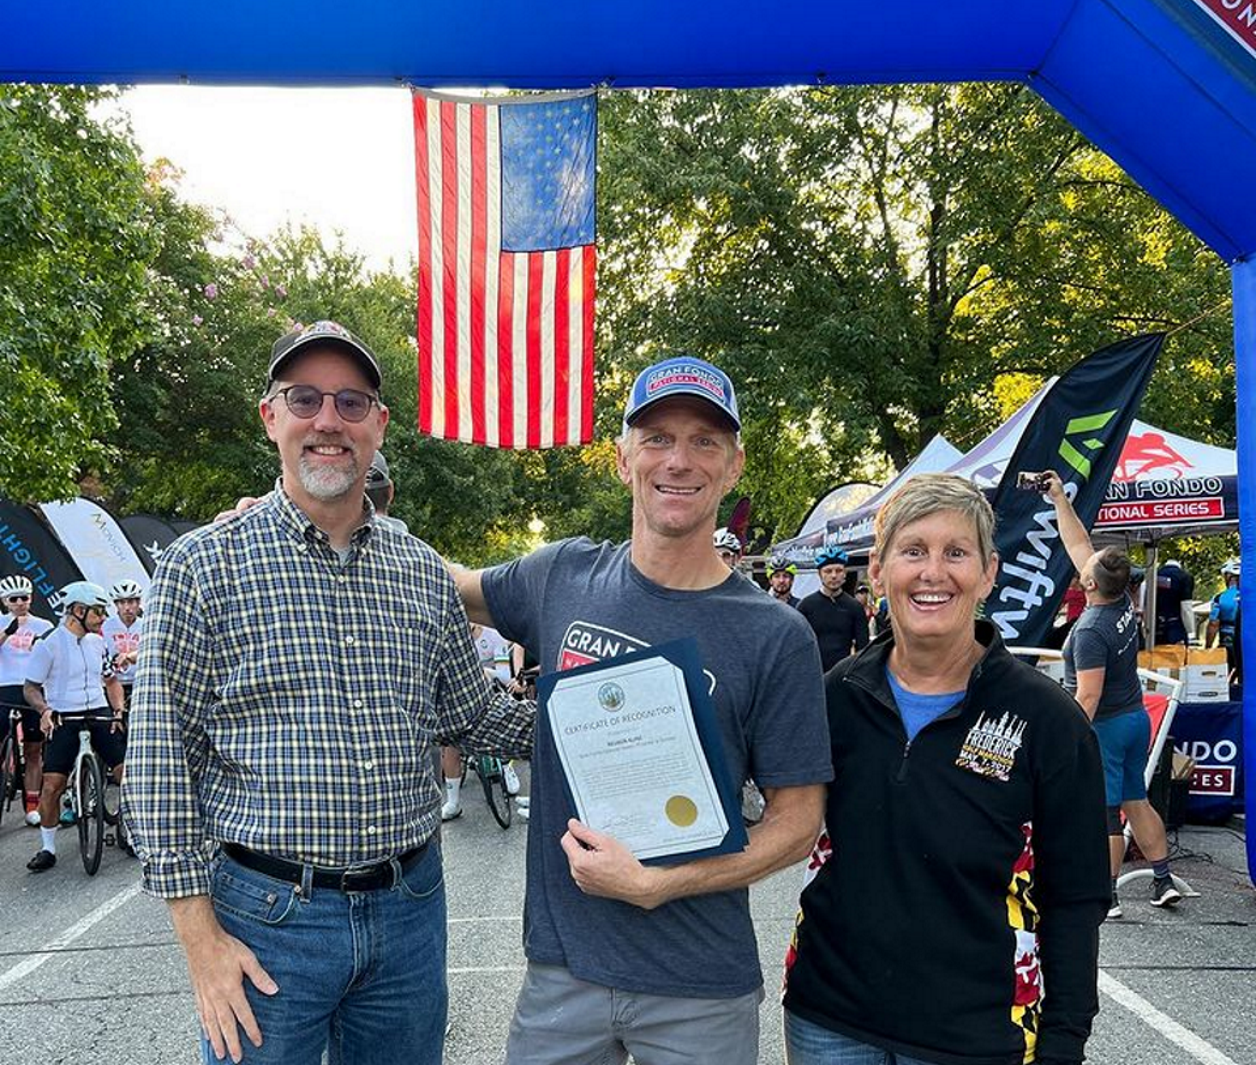 Reuben Kline, Founder and CEO of the series was presented with a Certificate of Recognition by the City of Frederick Mayor Michael O’Connor and City Council Member Kelly Russell